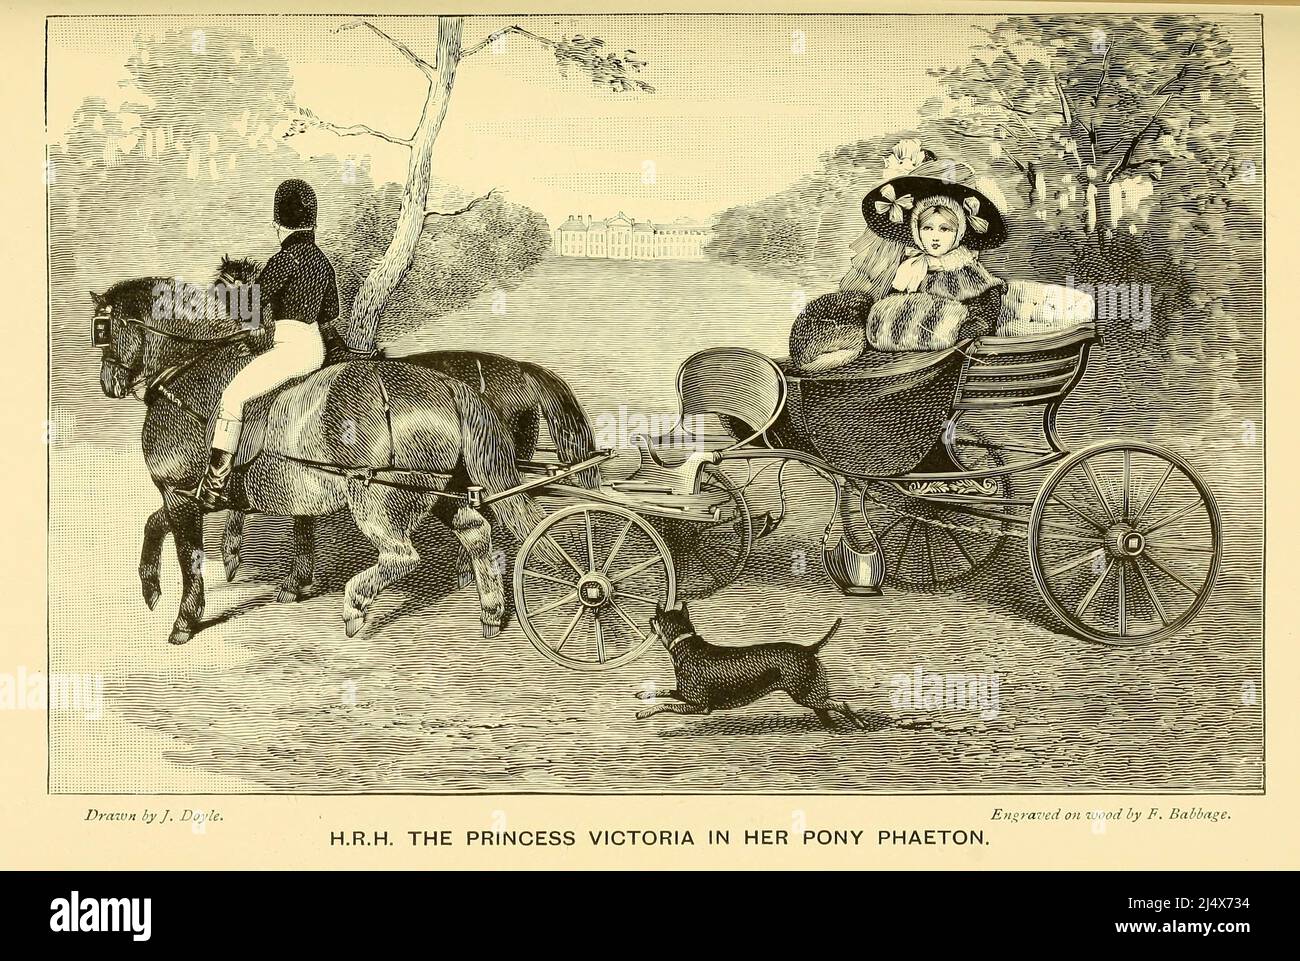 H.R.H. Princess Victoria in her Pony Phaeton from the book Thoroughbred and other ponies with remarks on the height of racehorses since 1700 : being a rev. ed. of Ponies: past and present by Sir Walter Gilbey, Publisher London : Vinton 1903 Stock Photo